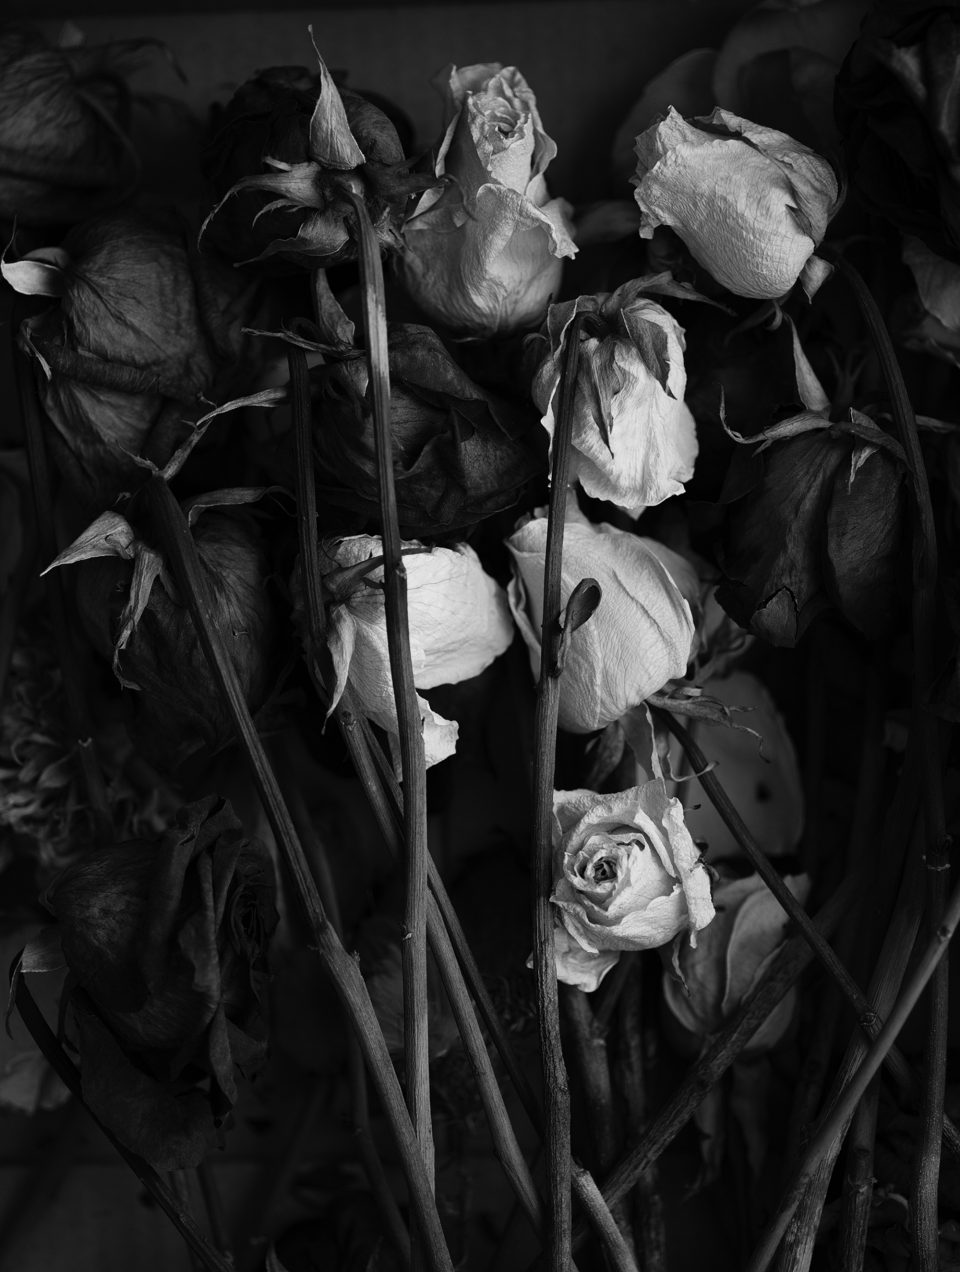 Box Full of Dead Roses - Black and White Photograph by Keith Dotson. Buy a fine art print.